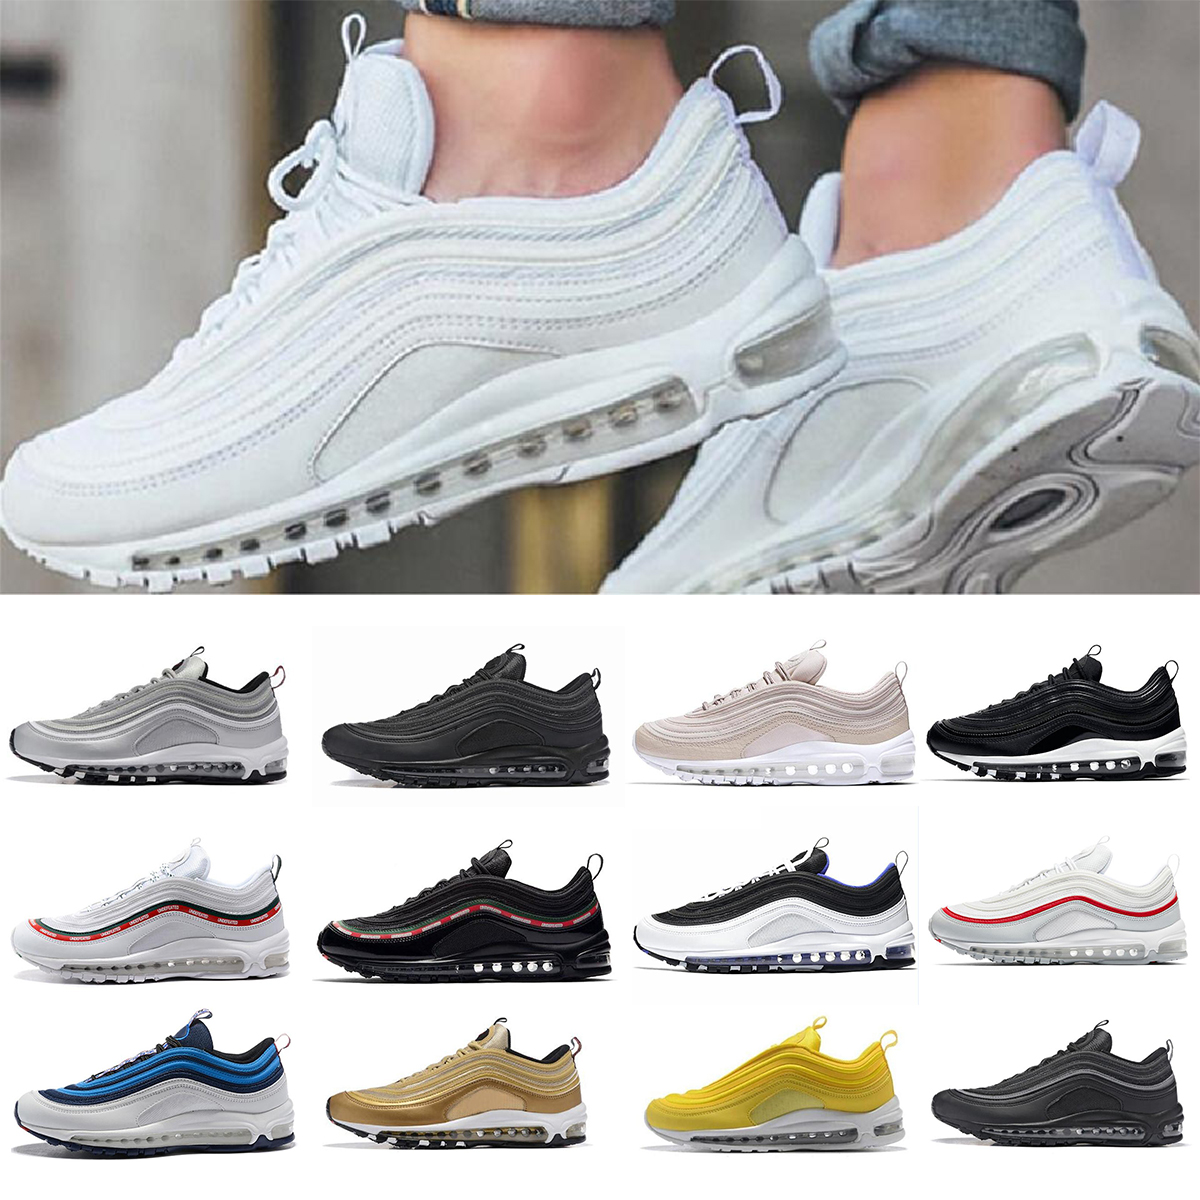 Hot Sale New Men Running Shoes Cushion Plastic Cheap Training Shoes Fashion Wholesale Outdoor Sneakers US 5.5-12 от DHgate WW